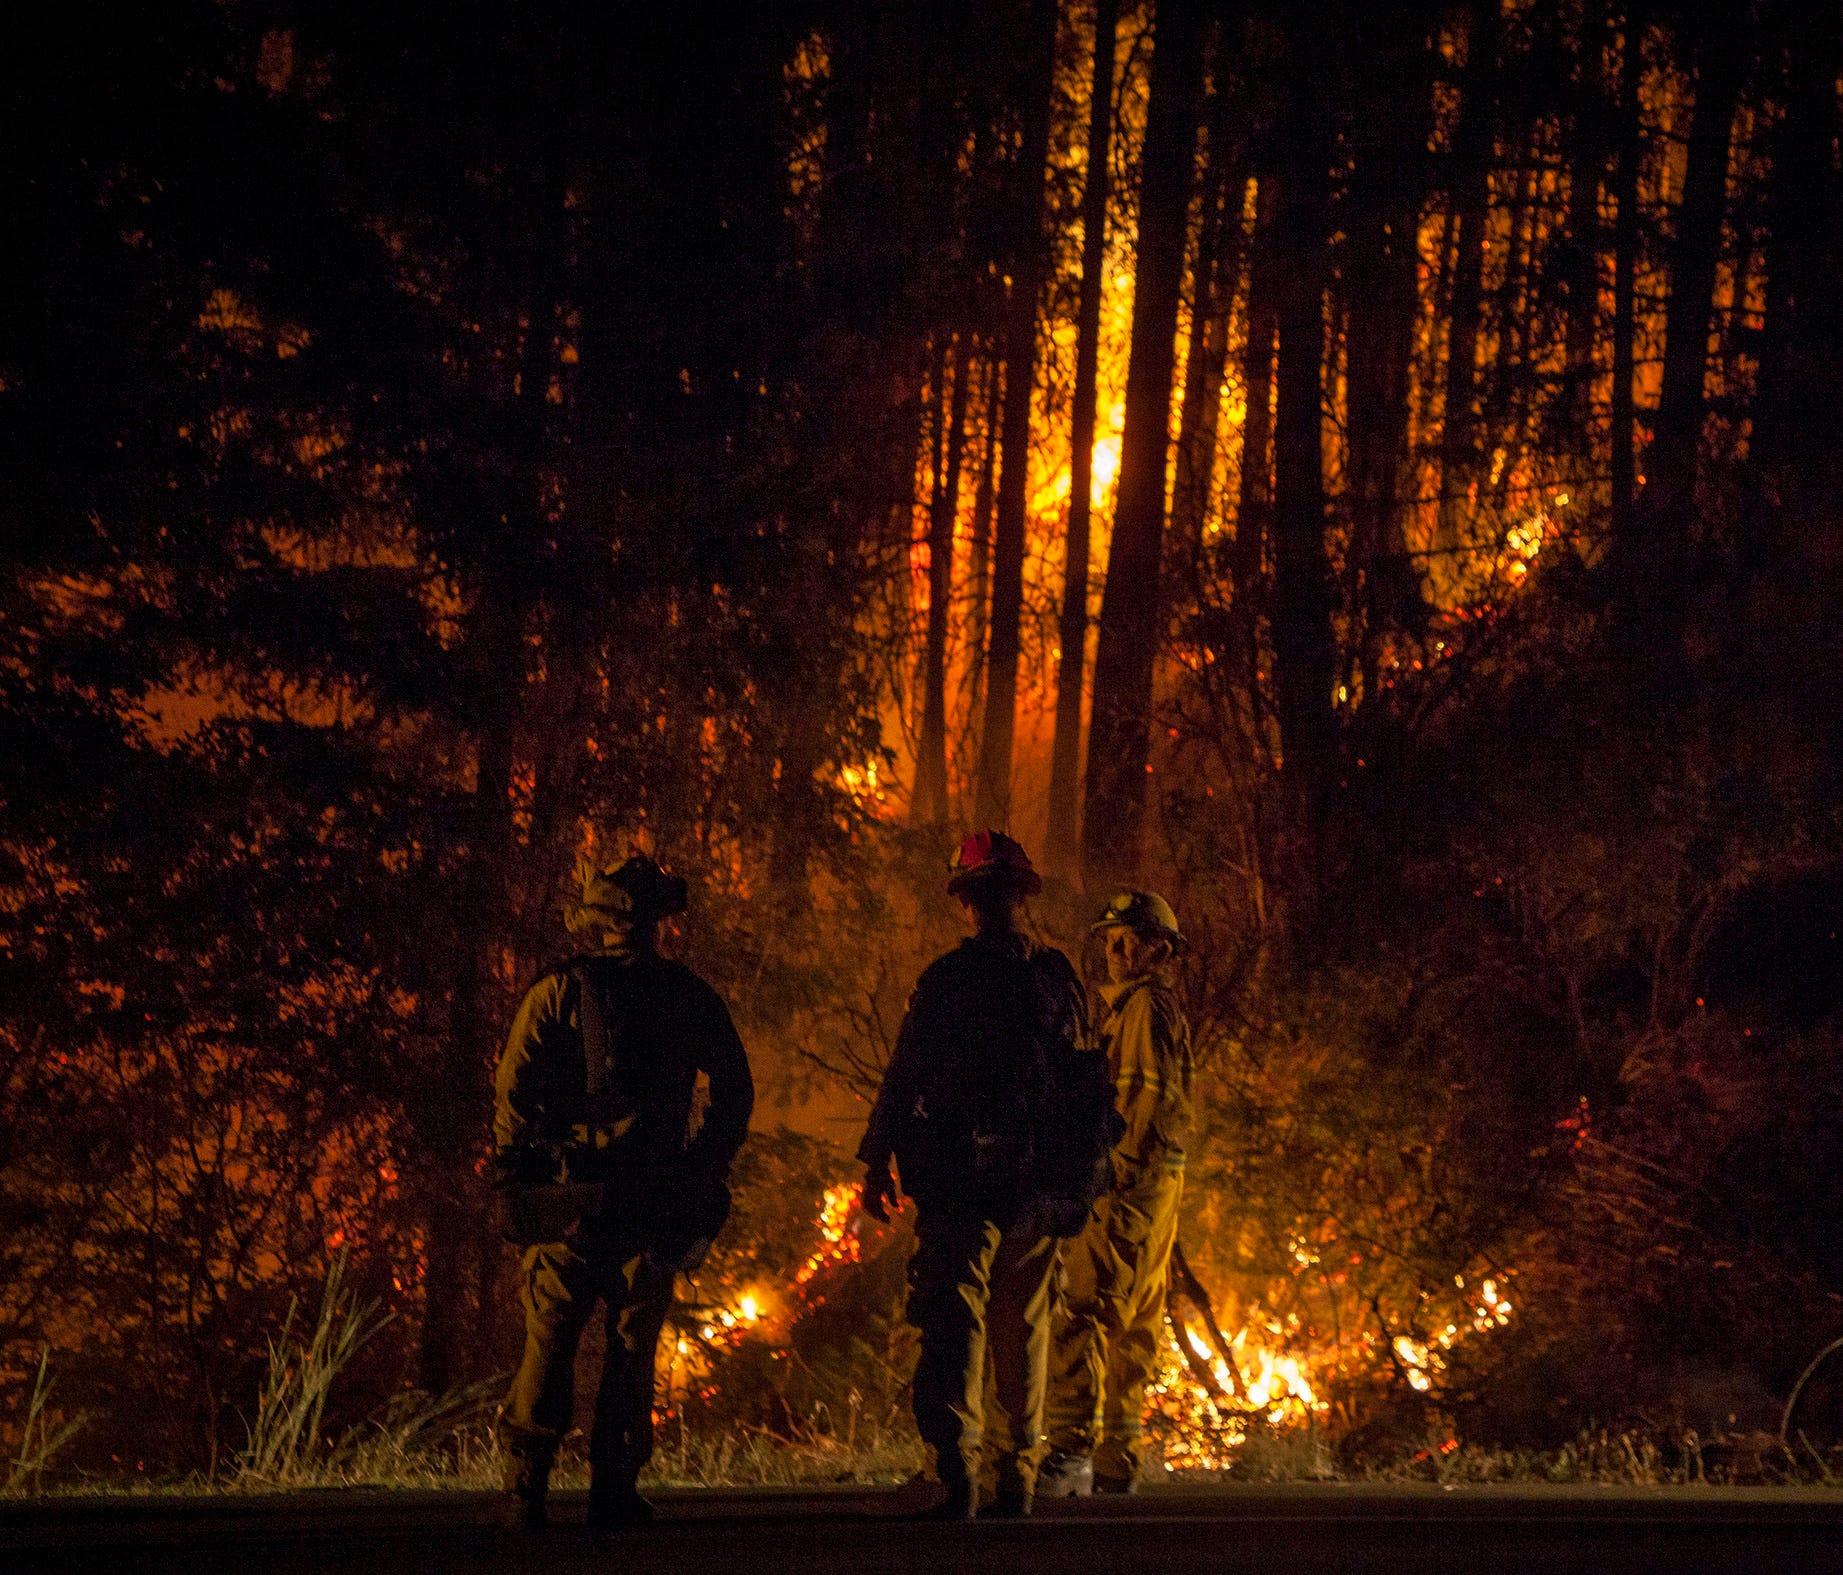 A Cal Fire firefighter, makes his way through the terrain after setting a backfire to burn excess fuel and make progress on the Carr Fire as it burns into the evening along Highway 299, just east of the Trinity County line in California on July 30, 2